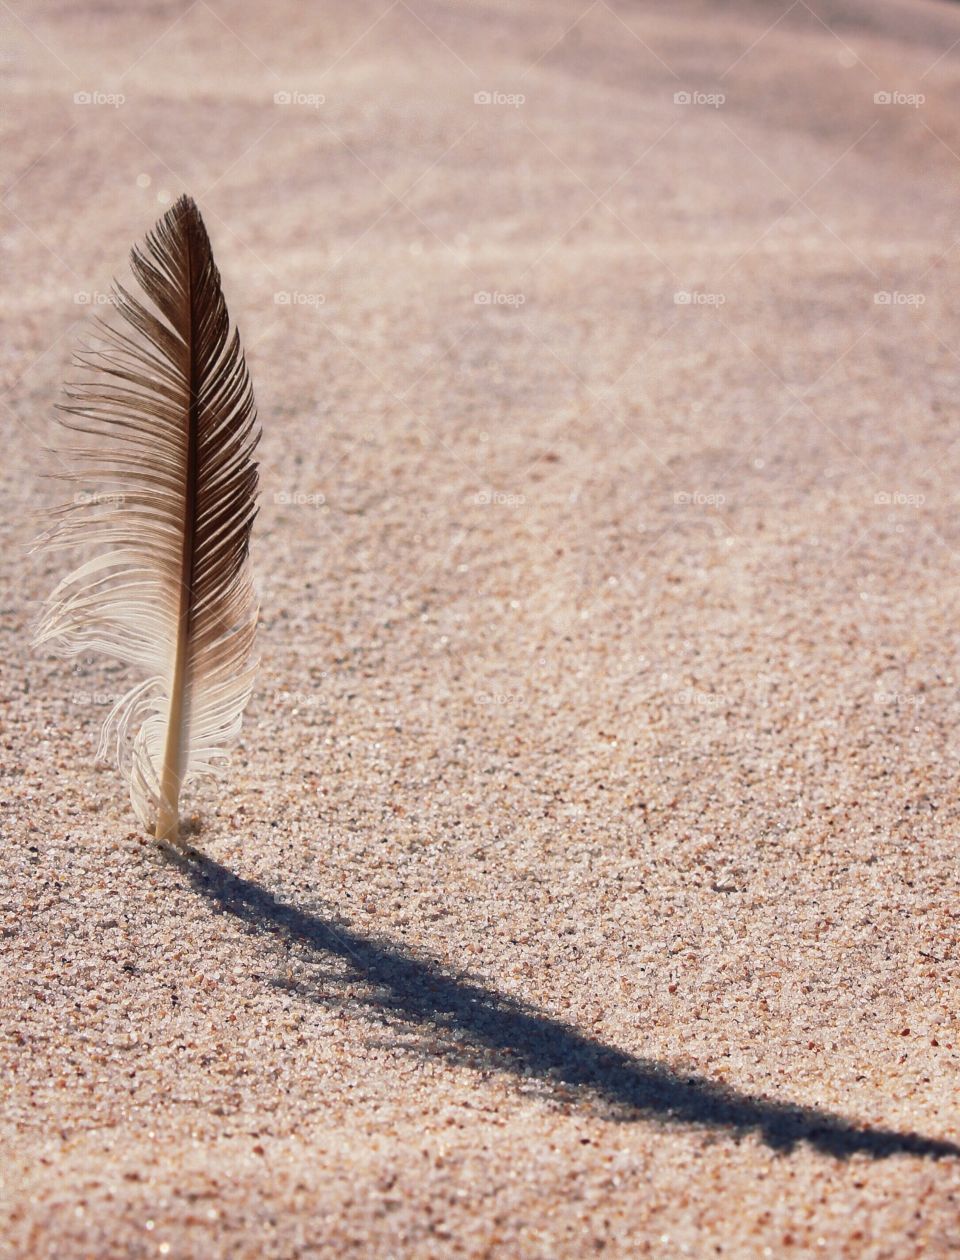 a bird feather becomes a beautiful object on the beach when exposed to the sun